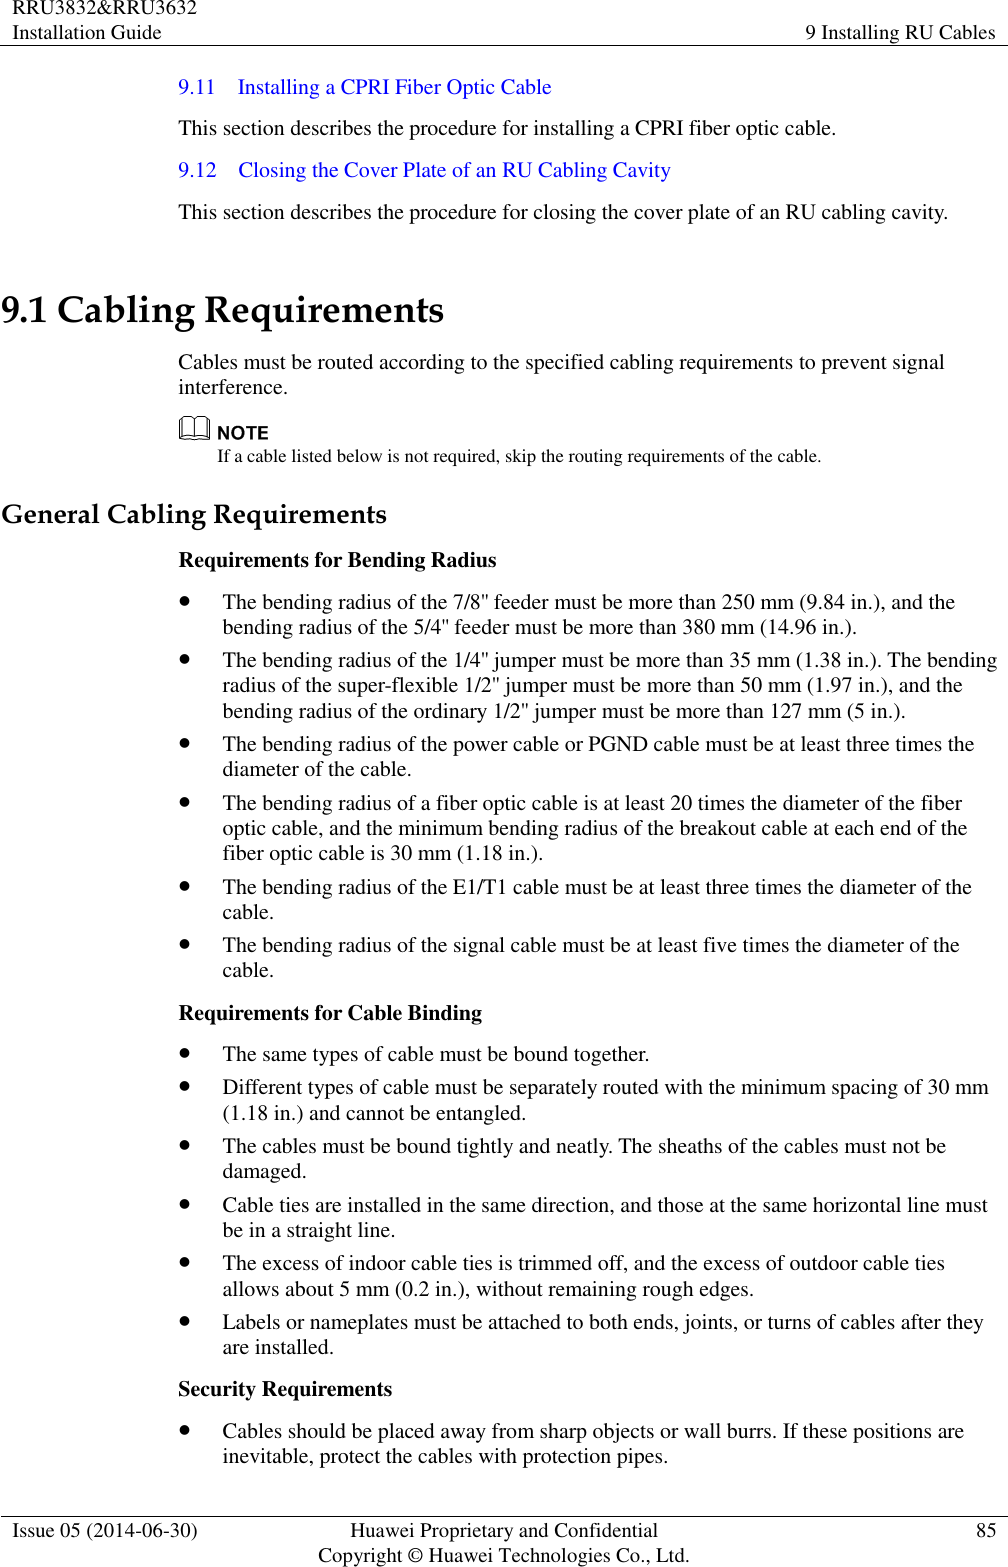 RRU3832&amp;RRU3632 Installation Guide 9 Installing RU Cables  Issue 05 (2014-06-30) Huawei Proprietary and Confidential                                     Copyright © Huawei Technologies Co., Ltd. 85  9.11    Installing a CPRI Fiber Optic Cable This section describes the procedure for installing a CPRI fiber optic cable. 9.12    Closing the Cover Plate of an RU Cabling Cavity This section describes the procedure for closing the cover plate of an RU cabling cavity. 9.1 Cabling Requirements Cables must be routed according to the specified cabling requirements to prevent signal interference.  If a cable listed below is not required, skip the routing requirements of the cable. General Cabling Requirements Requirements for Bending Radius  The bending radius of the 7/8&apos;&apos; feeder must be more than 250 mm (9.84 in.), and the bending radius of the 5/4&apos;&apos; feeder must be more than 380 mm (14.96 in.).  The bending radius of the 1/4&apos;&apos; jumper must be more than 35 mm (1.38 in.). The bending radius of the super-flexible 1/2&apos;&apos; jumper must be more than 50 mm (1.97 in.), and the bending radius of the ordinary 1/2&apos;&apos; jumper must be more than 127 mm (5 in.).  The bending radius of the power cable or PGND cable must be at least three times the diameter of the cable.  The bending radius of a fiber optic cable is at least 20 times the diameter of the fiber optic cable, and the minimum bending radius of the breakout cable at each end of the fiber optic cable is 30 mm (1.18 in.).  The bending radius of the E1/T1 cable must be at least three times the diameter of the cable.  The bending radius of the signal cable must be at least five times the diameter of the cable. Requirements for Cable Binding  The same types of cable must be bound together.  Different types of cable must be separately routed with the minimum spacing of 30 mm (1.18 in.) and cannot be entangled.  The cables must be bound tightly and neatly. The sheaths of the cables must not be damaged.  Cable ties are installed in the same direction, and those at the same horizontal line must be in a straight line.  The excess of indoor cable ties is trimmed off, and the excess of outdoor cable ties allows about 5 mm (0.2 in.), without remaining rough edges.  Labels or nameplates must be attached to both ends, joints, or turns of cables after they are installed. Security Requirements  Cables should be placed away from sharp objects or wall burrs. If these positions are inevitable, protect the cables with protection pipes. 